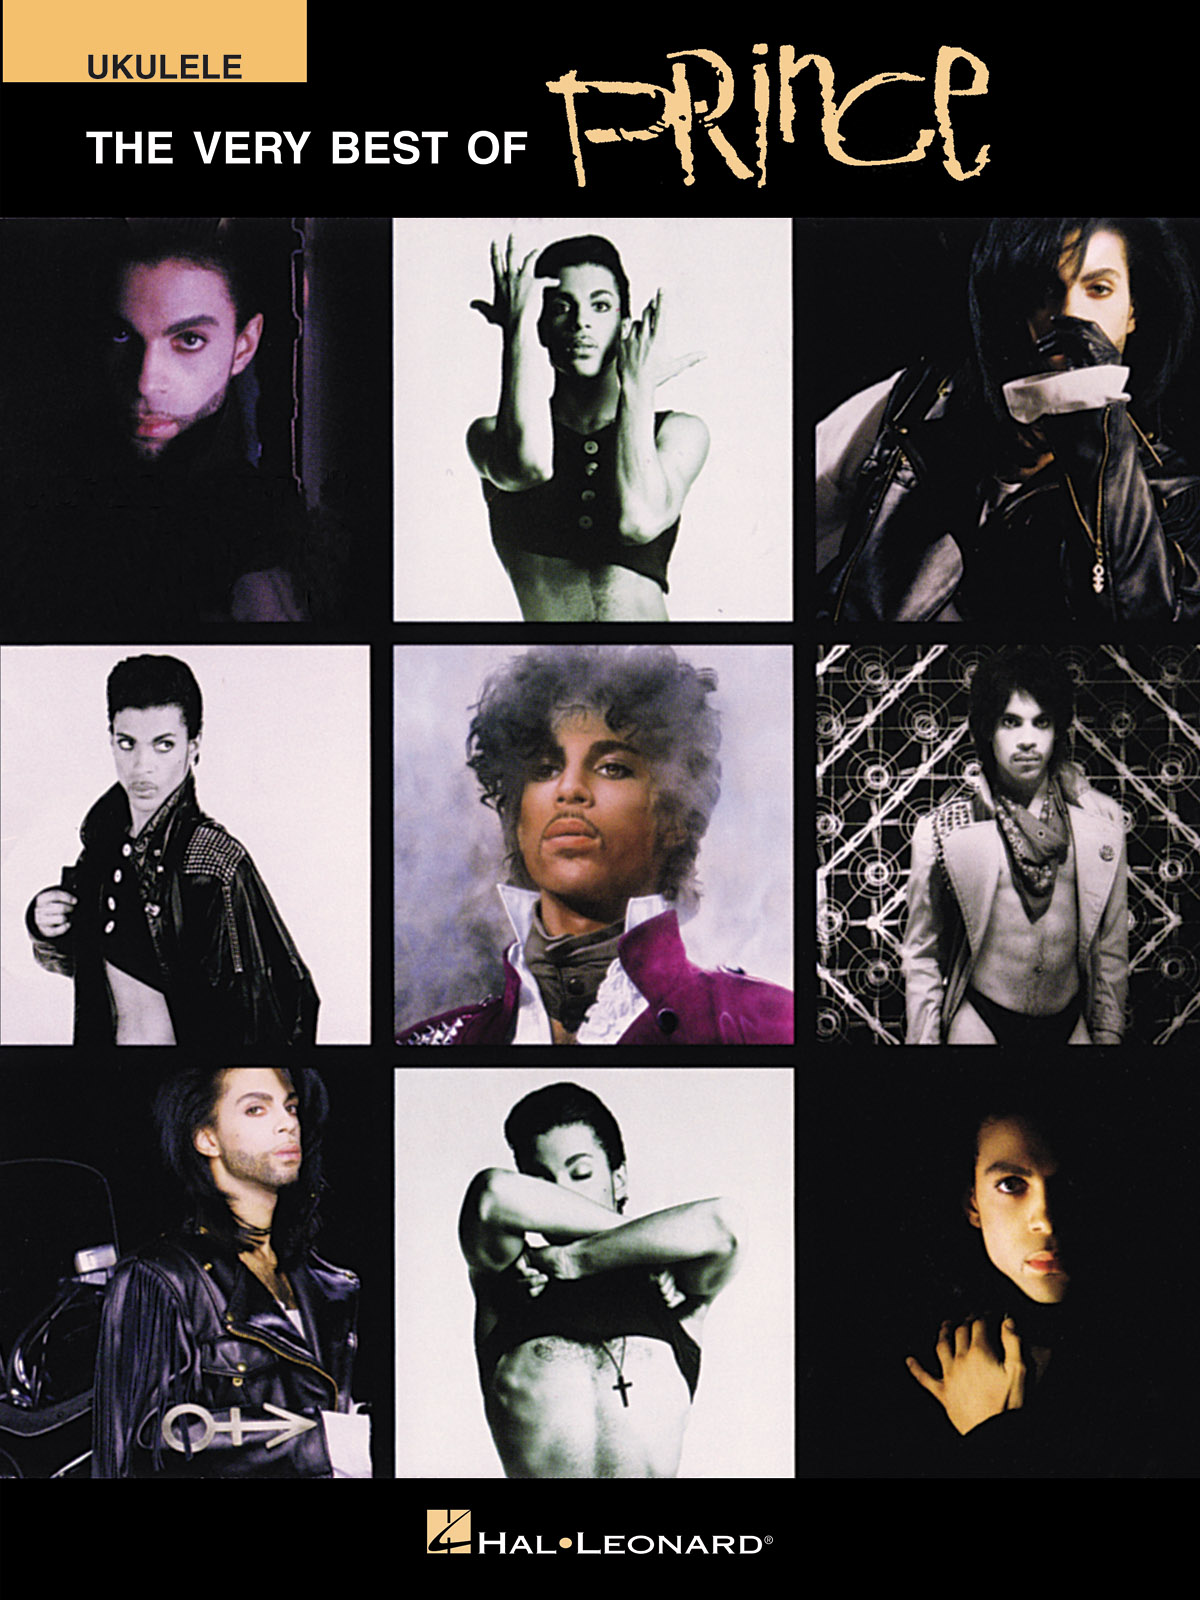 The Very Best Of (PRINCE)